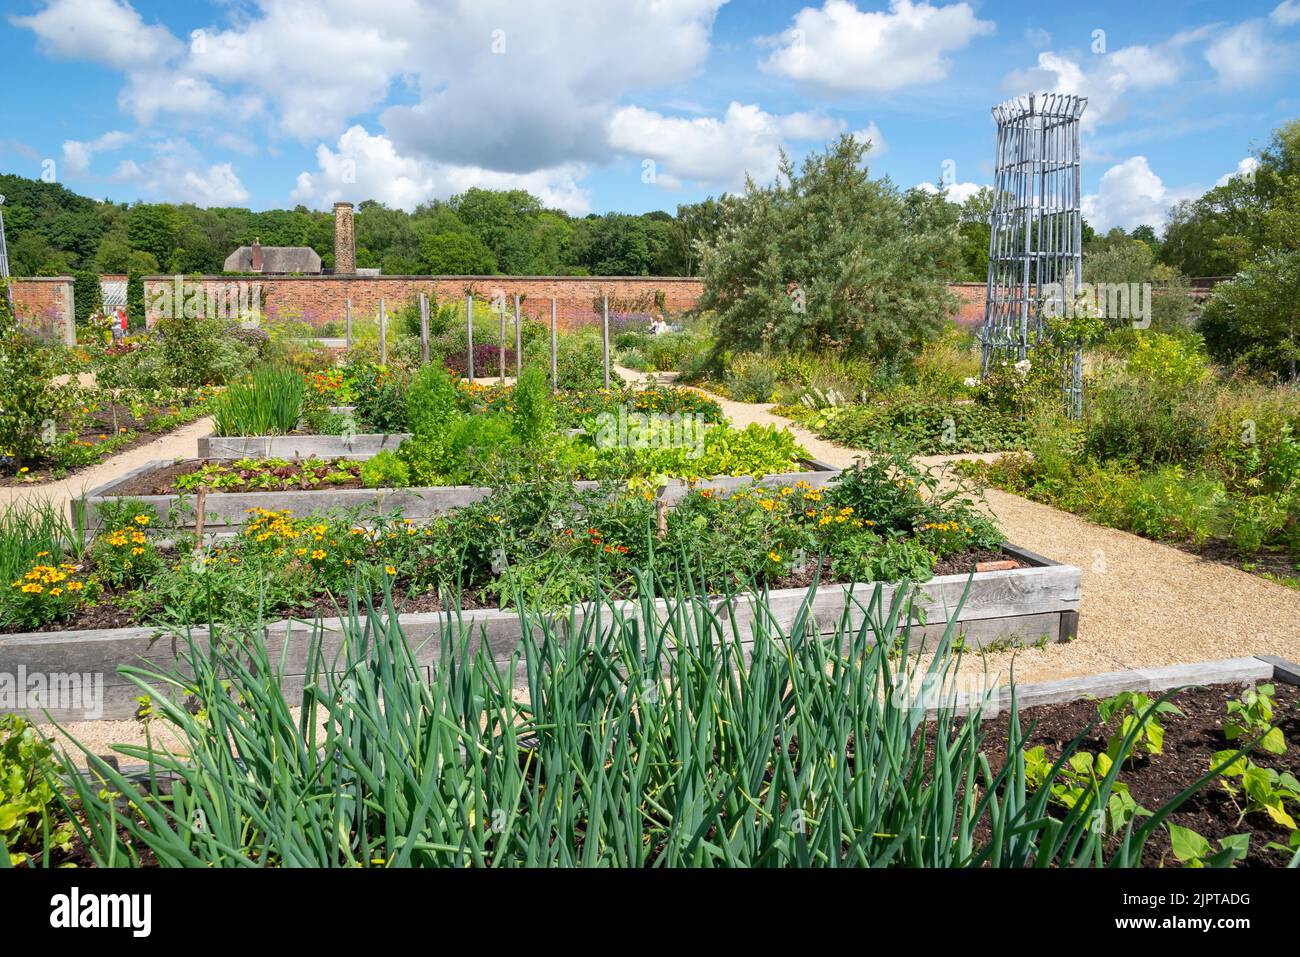 Raised beds with vegetables growing in them in the Weston Walled garden at RHS Bridgewater, Greater Manchester, England. Stock Photo